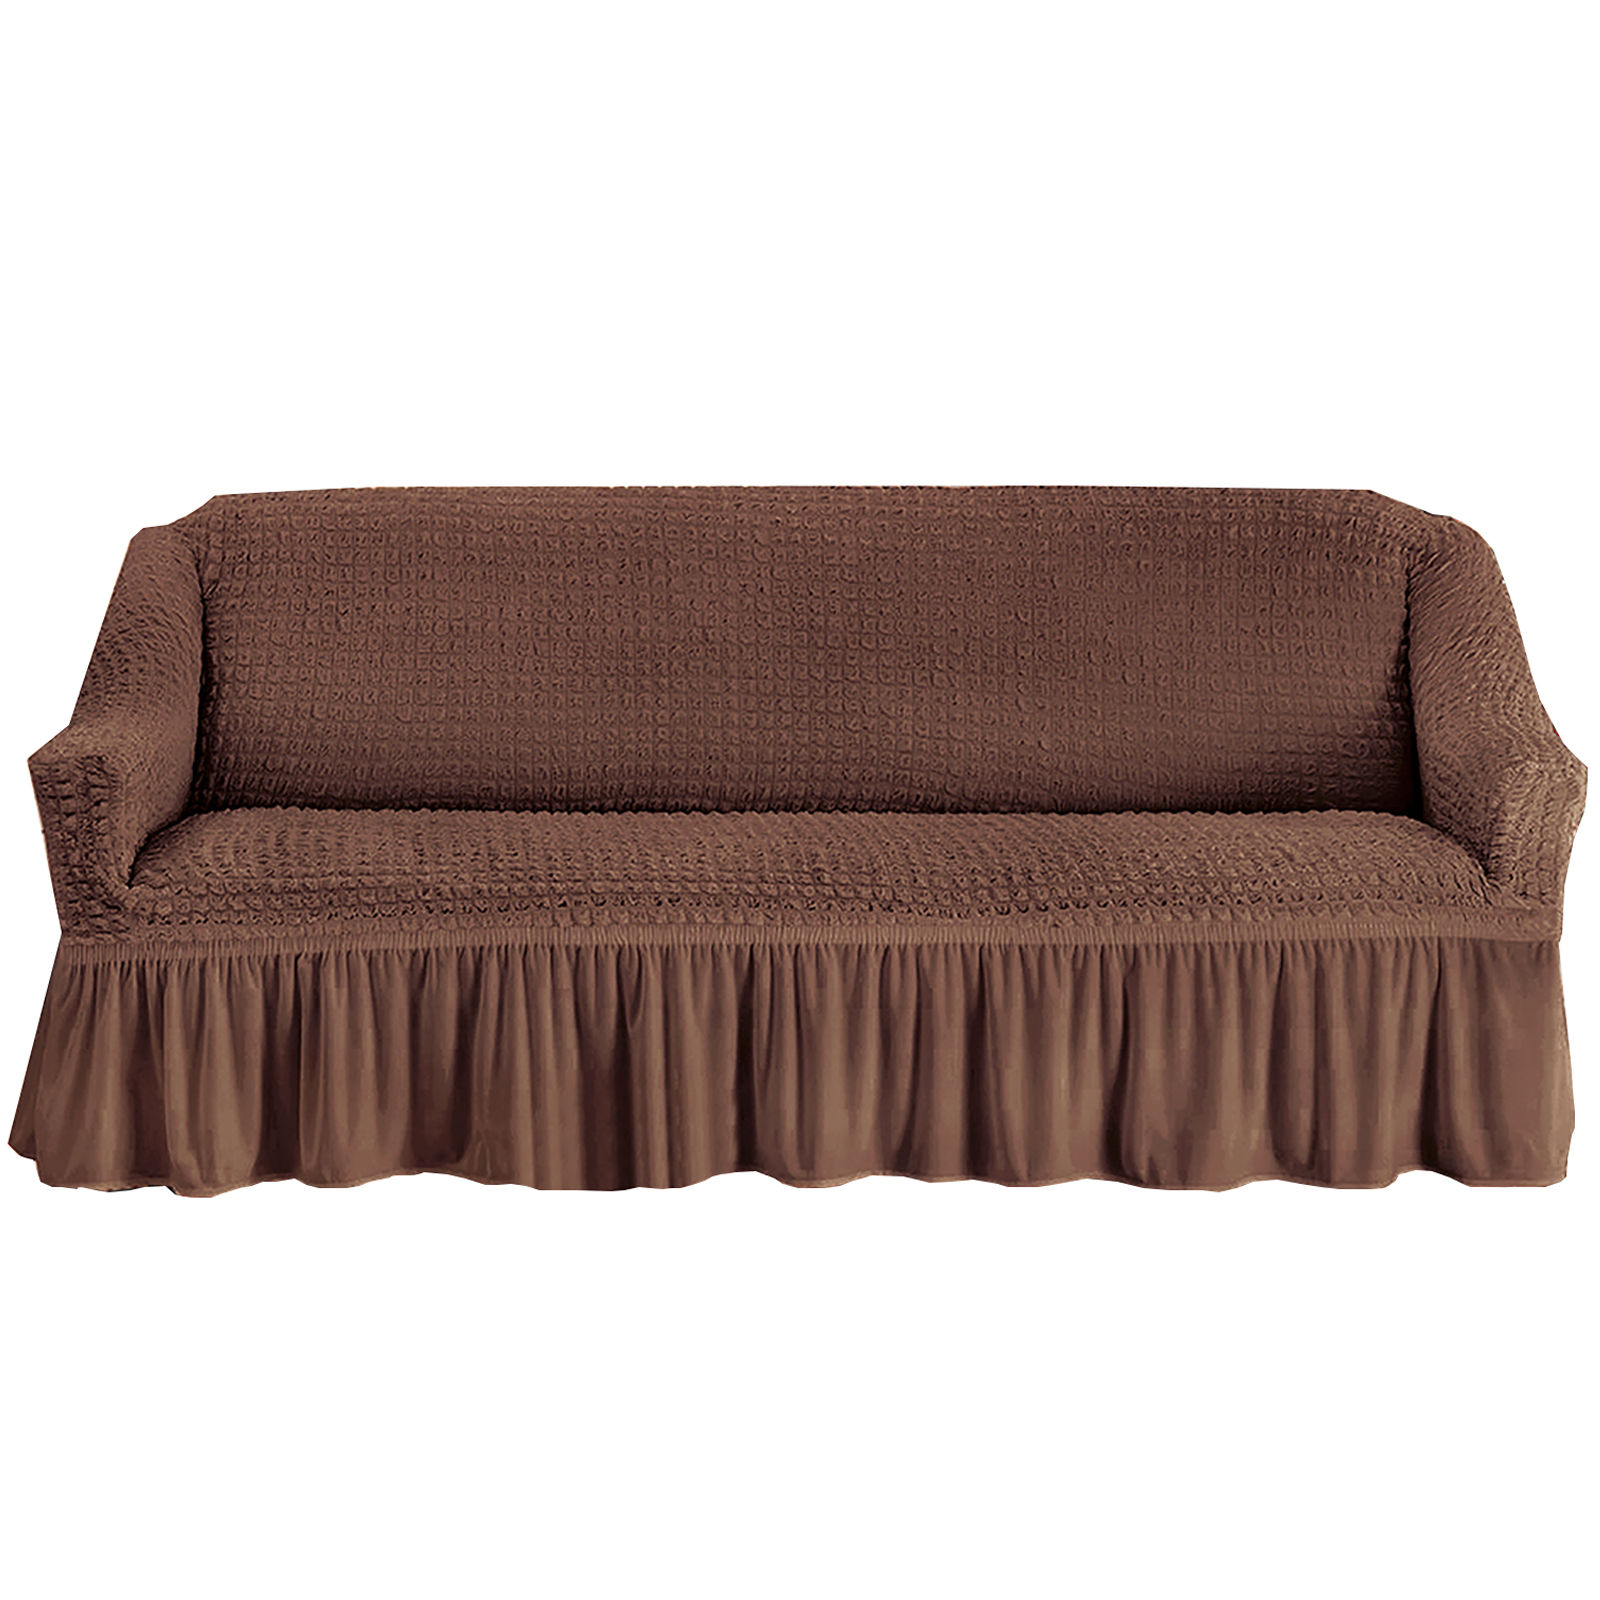 Stretch Sofa Slipcover, 3 Seater Sofa Slipcovers With Skirt With Armless Soft Sofa Cover Elastic Straps Sofa Slipcover For Living Room Kids Pets-Brown B-Small